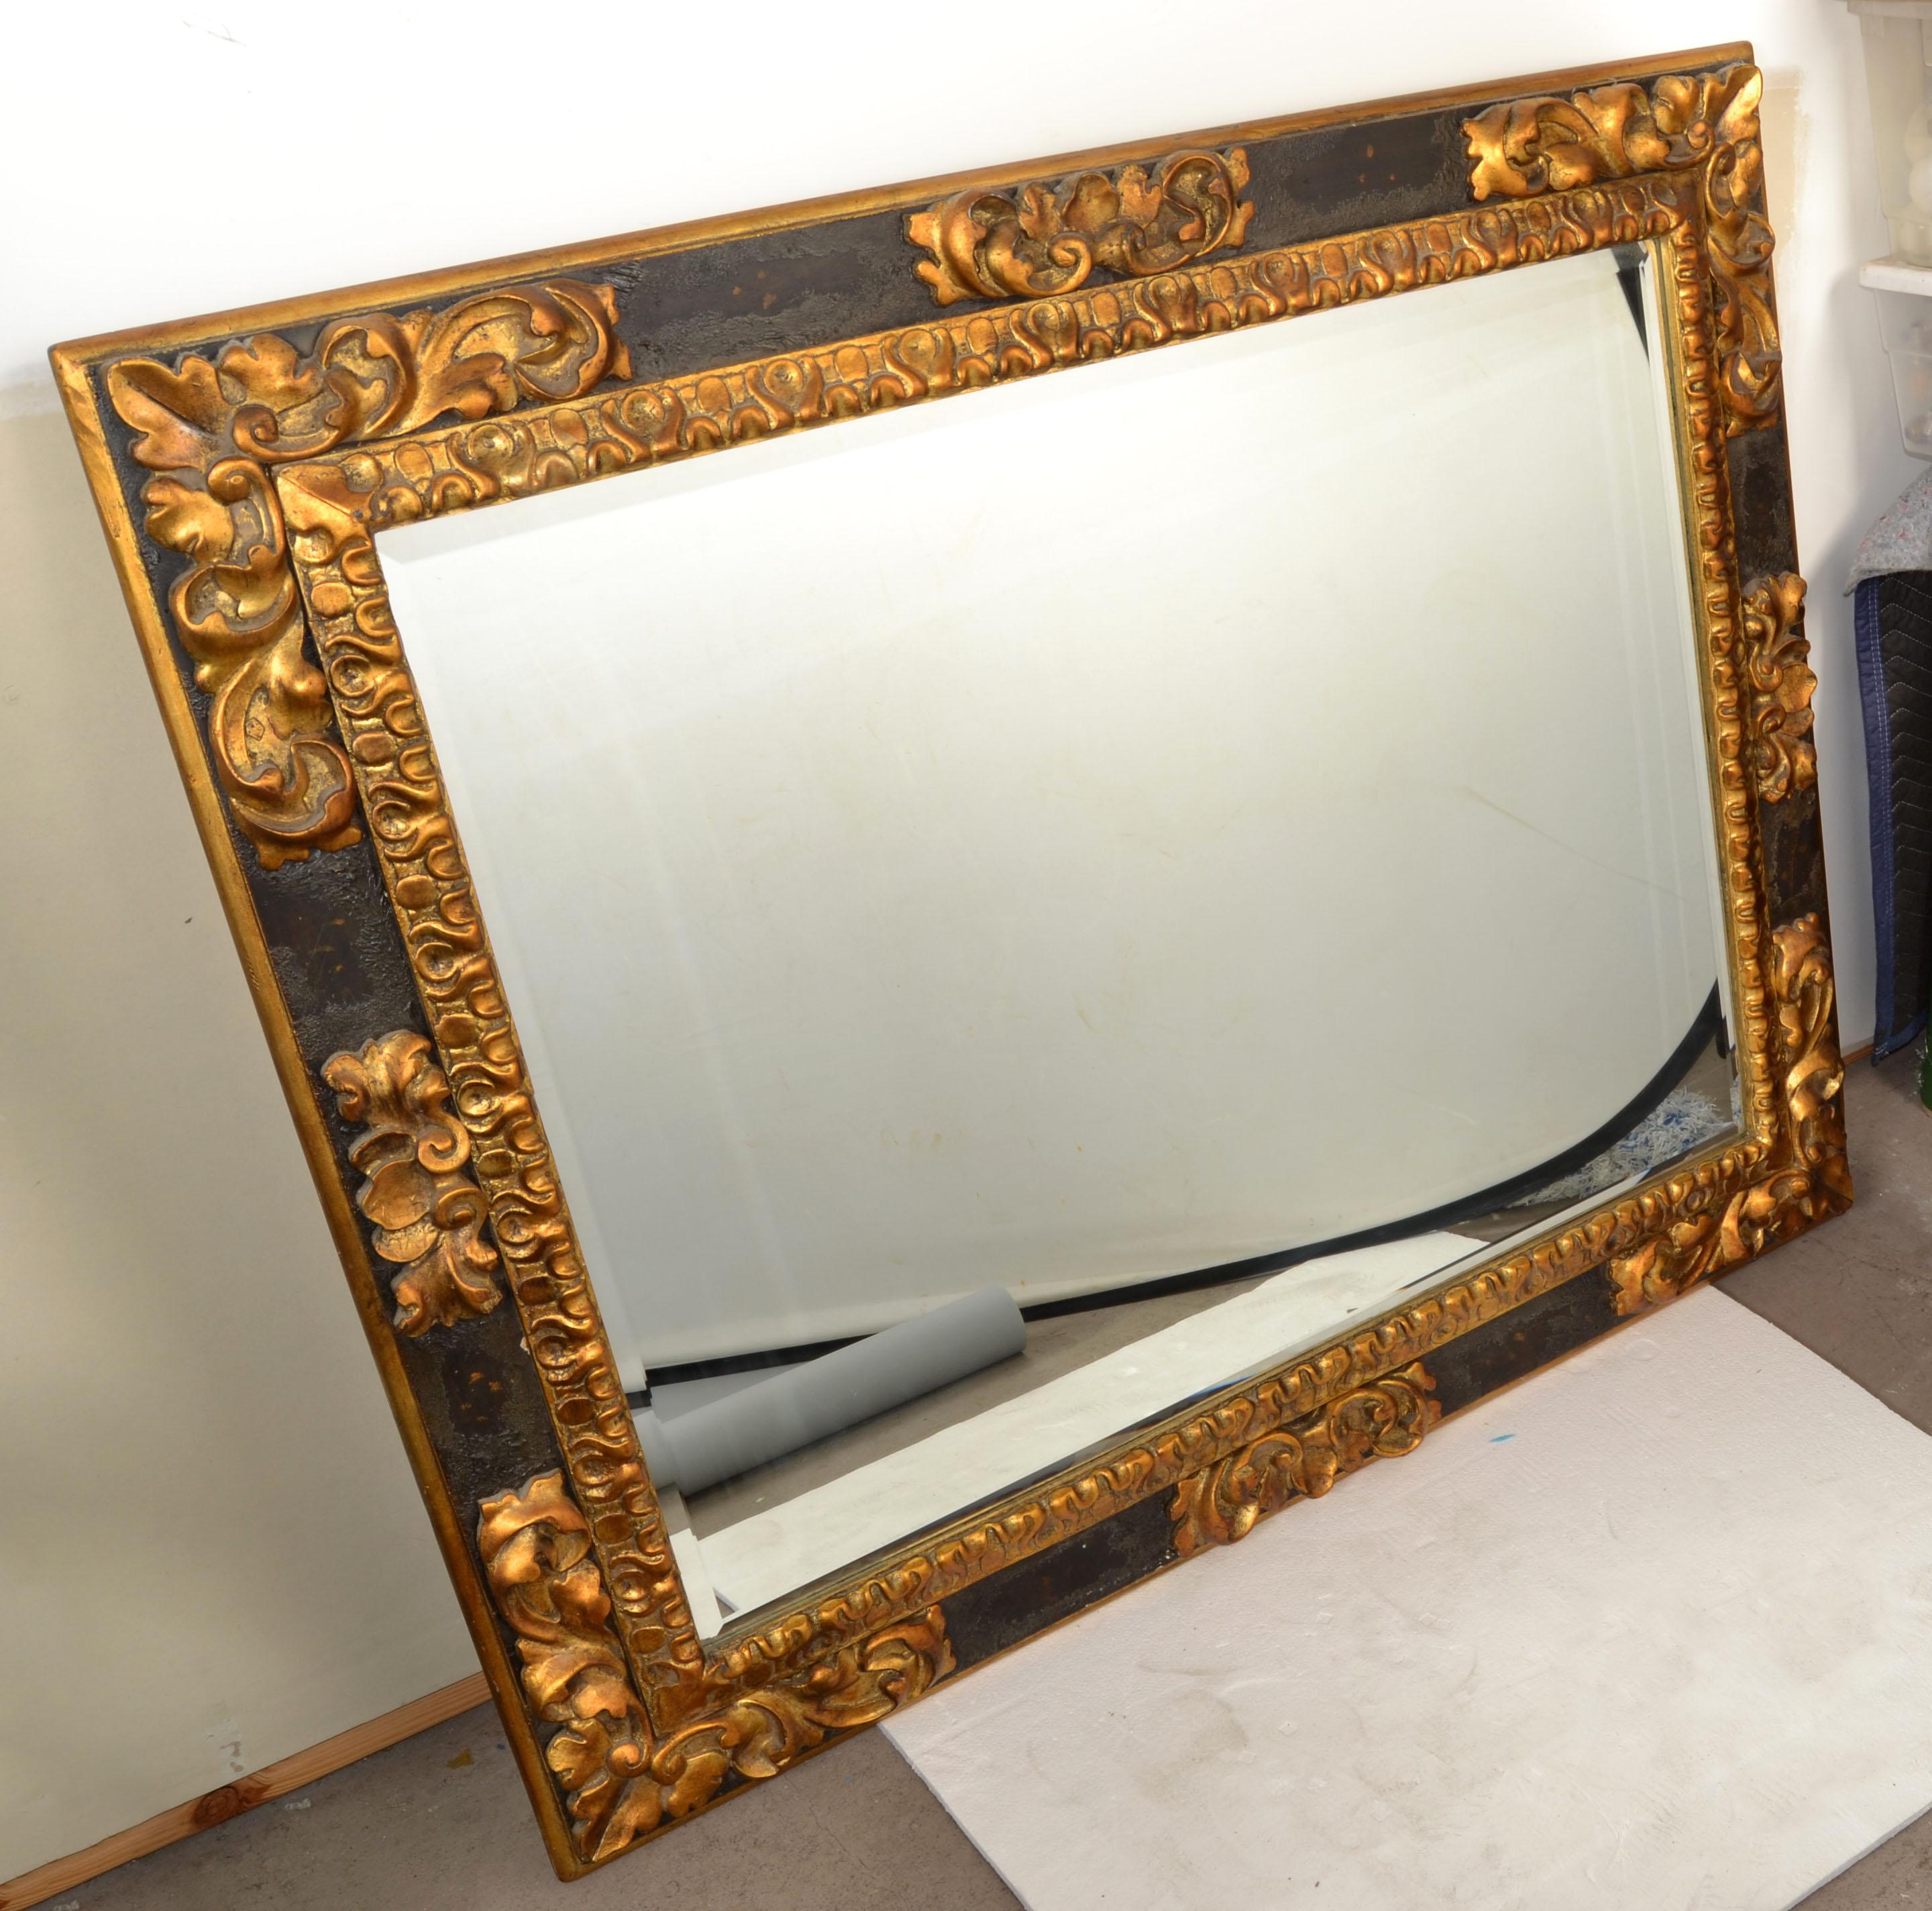 American Neoclassical large rectangle Wall Mirror in Black Finish framed with hand carved Acanthus Scroll Design in Giltwood.
The Mirror Glass has a beveled edge and sits tight in the decorative giltwood inner border.
The heavy Mirror is supported